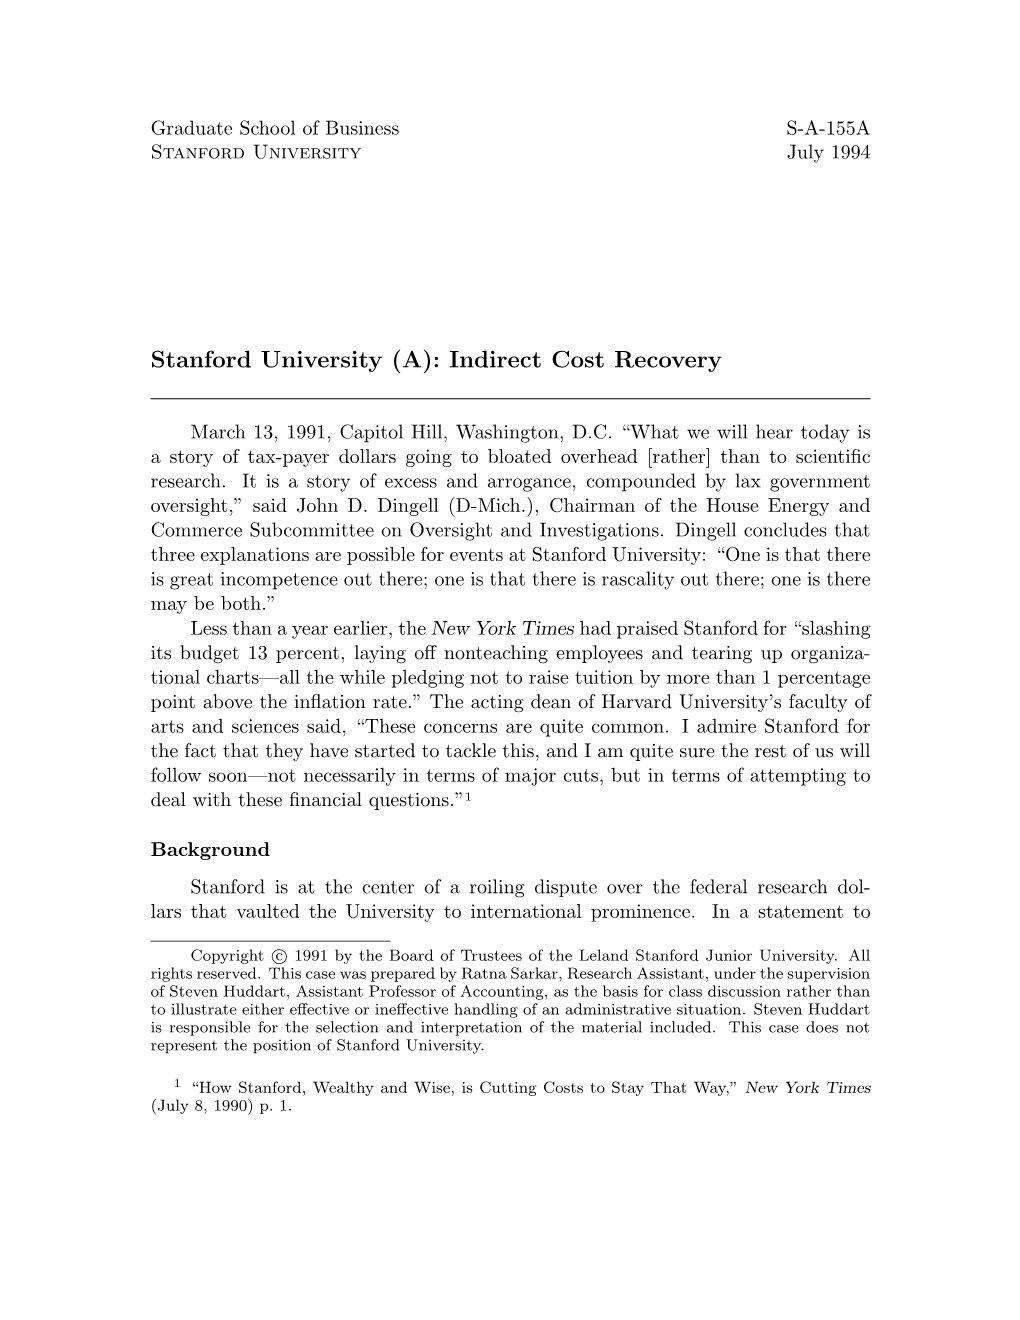 Stanford University (A): Indirect Cost Recovery